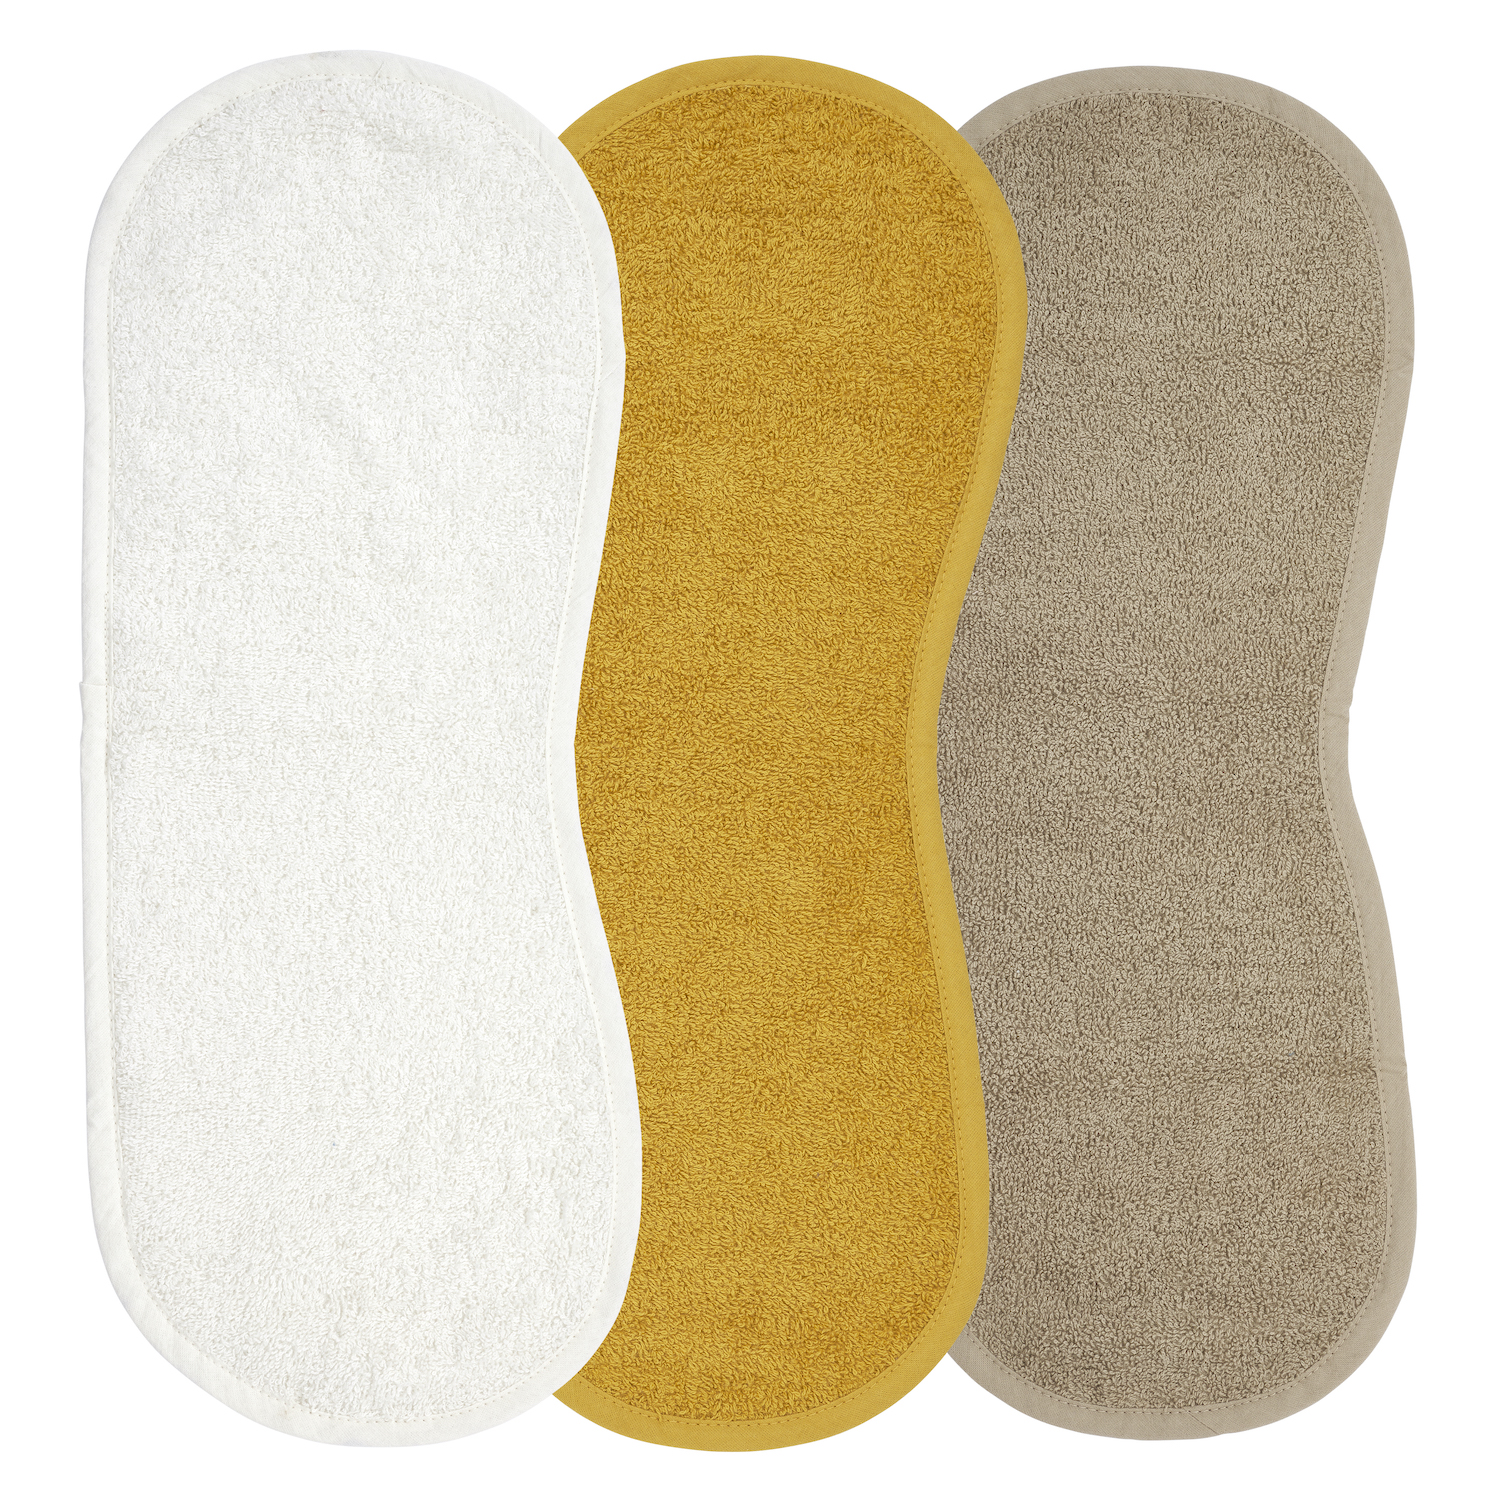 Spucktuch XL Frottee 3-pack  - Offwhite/Honey Gold/Taupe - 53x20cm